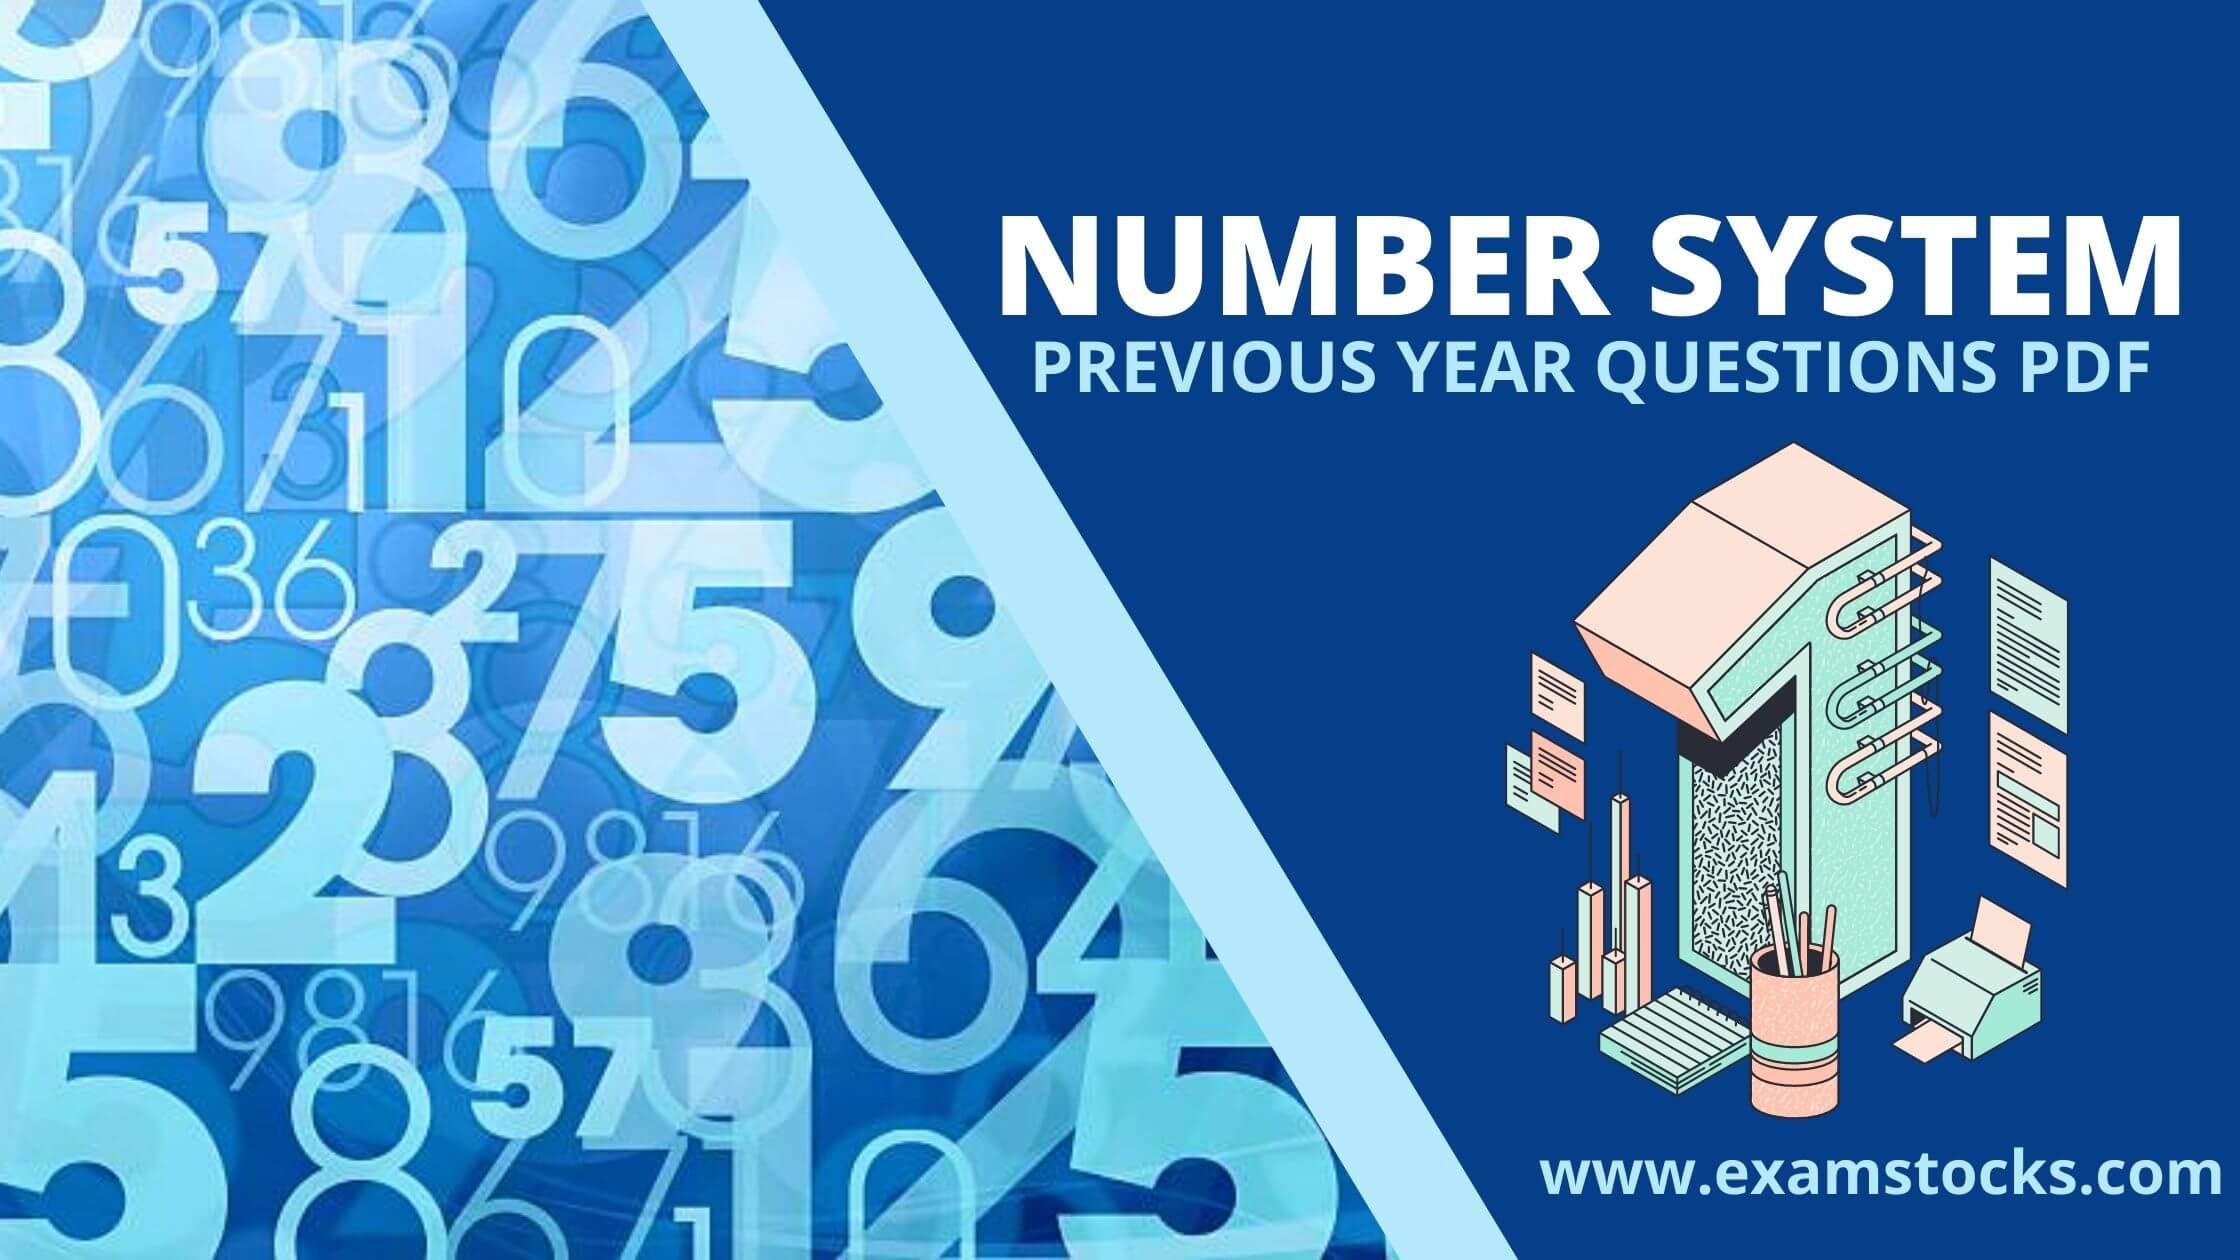 case study questions number system